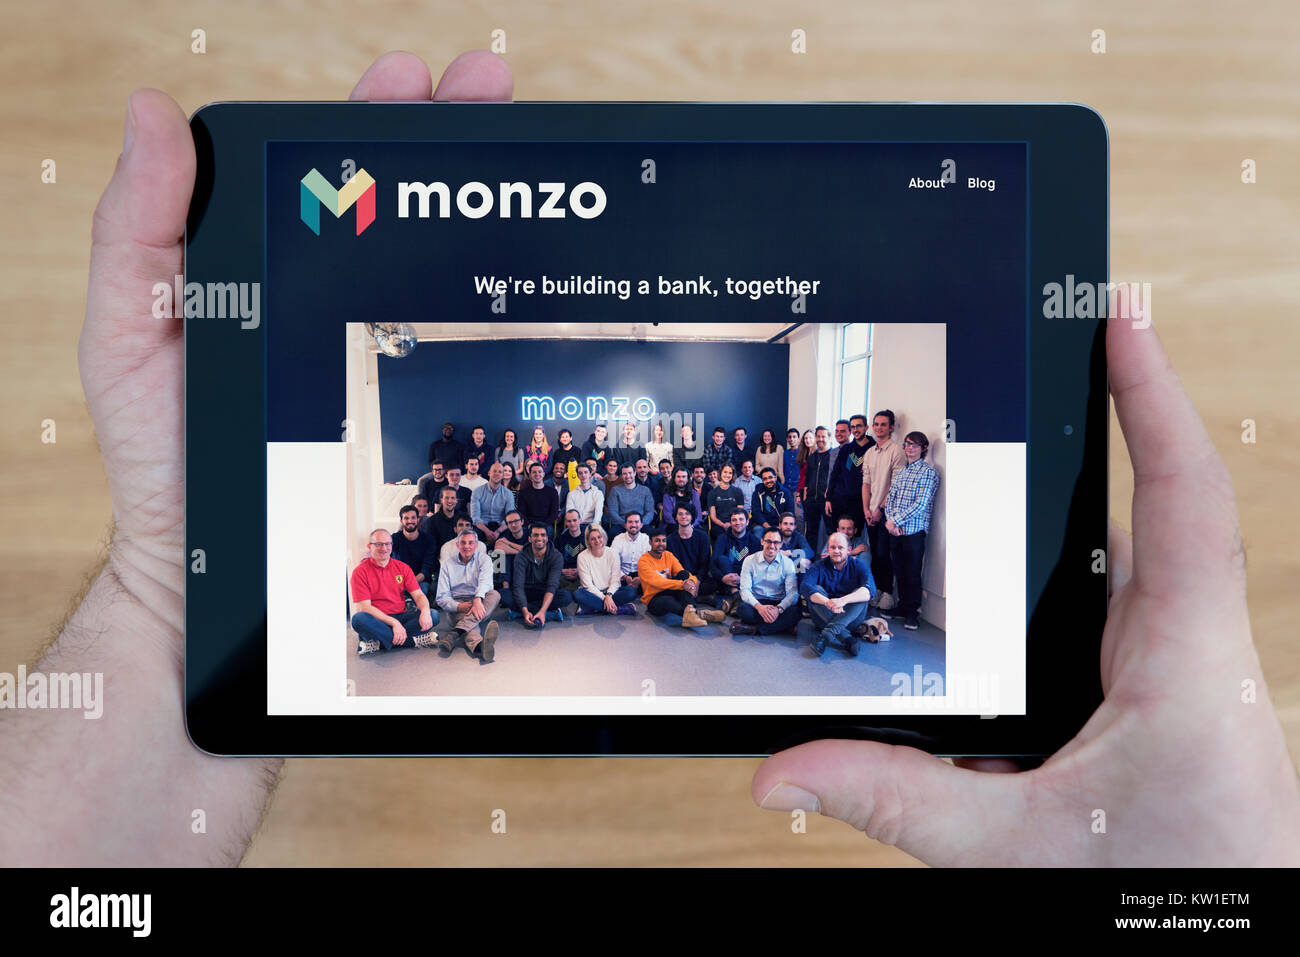 A man looks at the Monzo Bank website on his iPad tablet device, shot against a wooden table top background (Editorial use only). Stock Photo